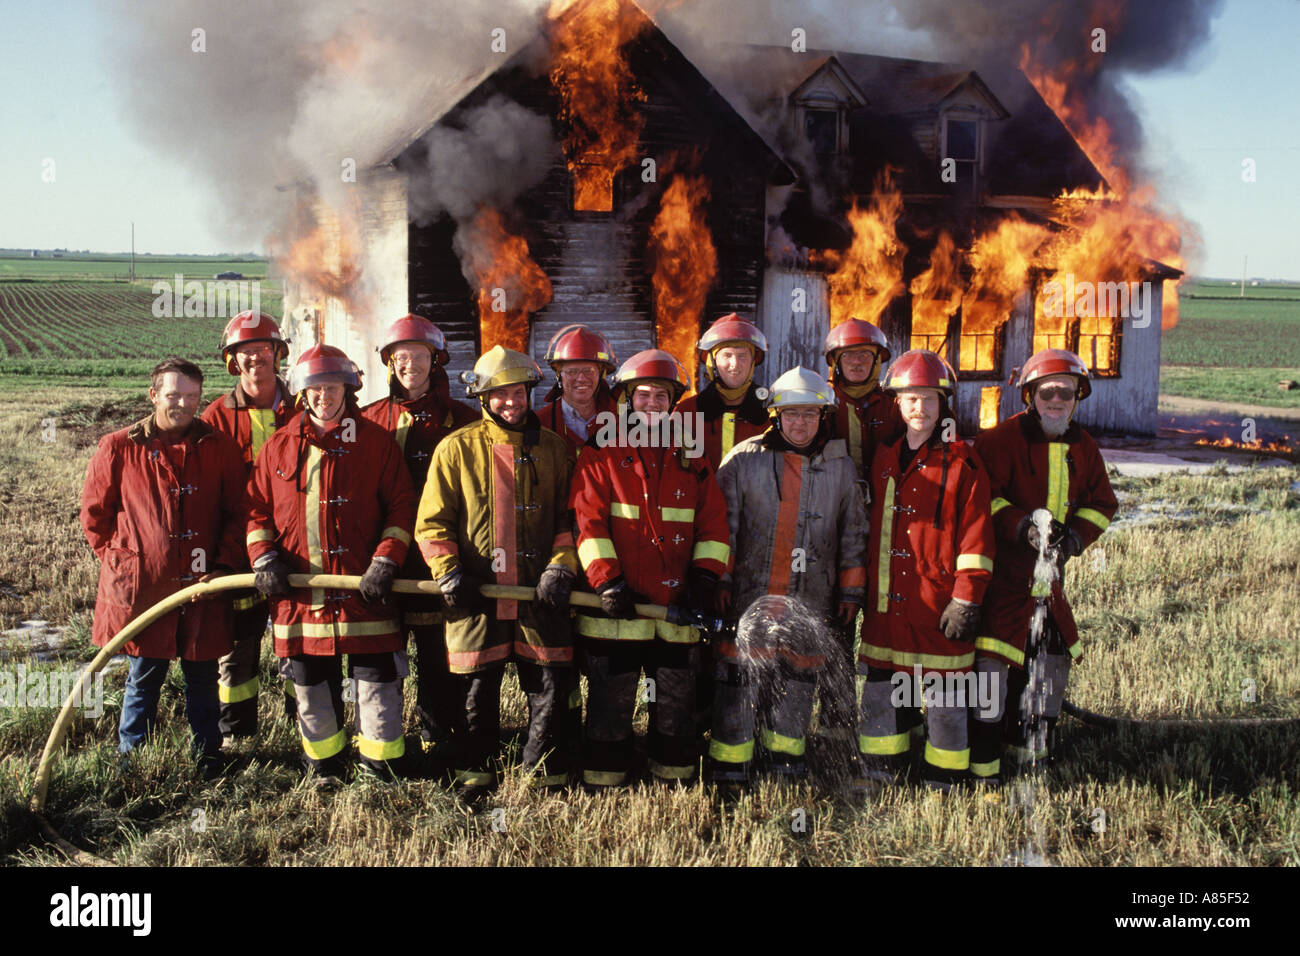 Firefighters pose for a photo while a house burns down Stock Photo